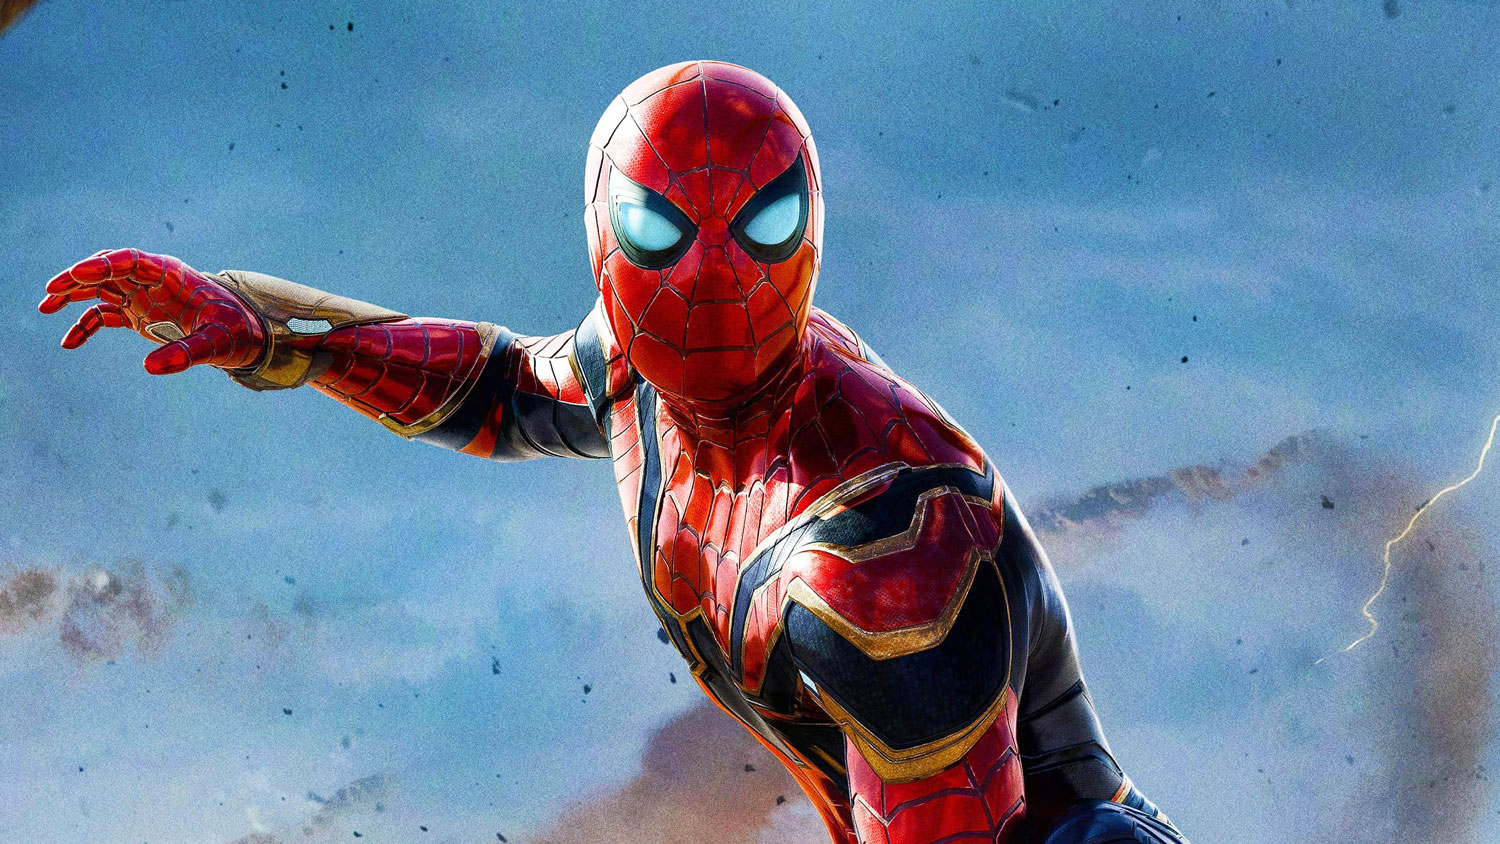 Spider-Man: No Way Home To Be Released On Streaming This Year - But Not On Disney Plus